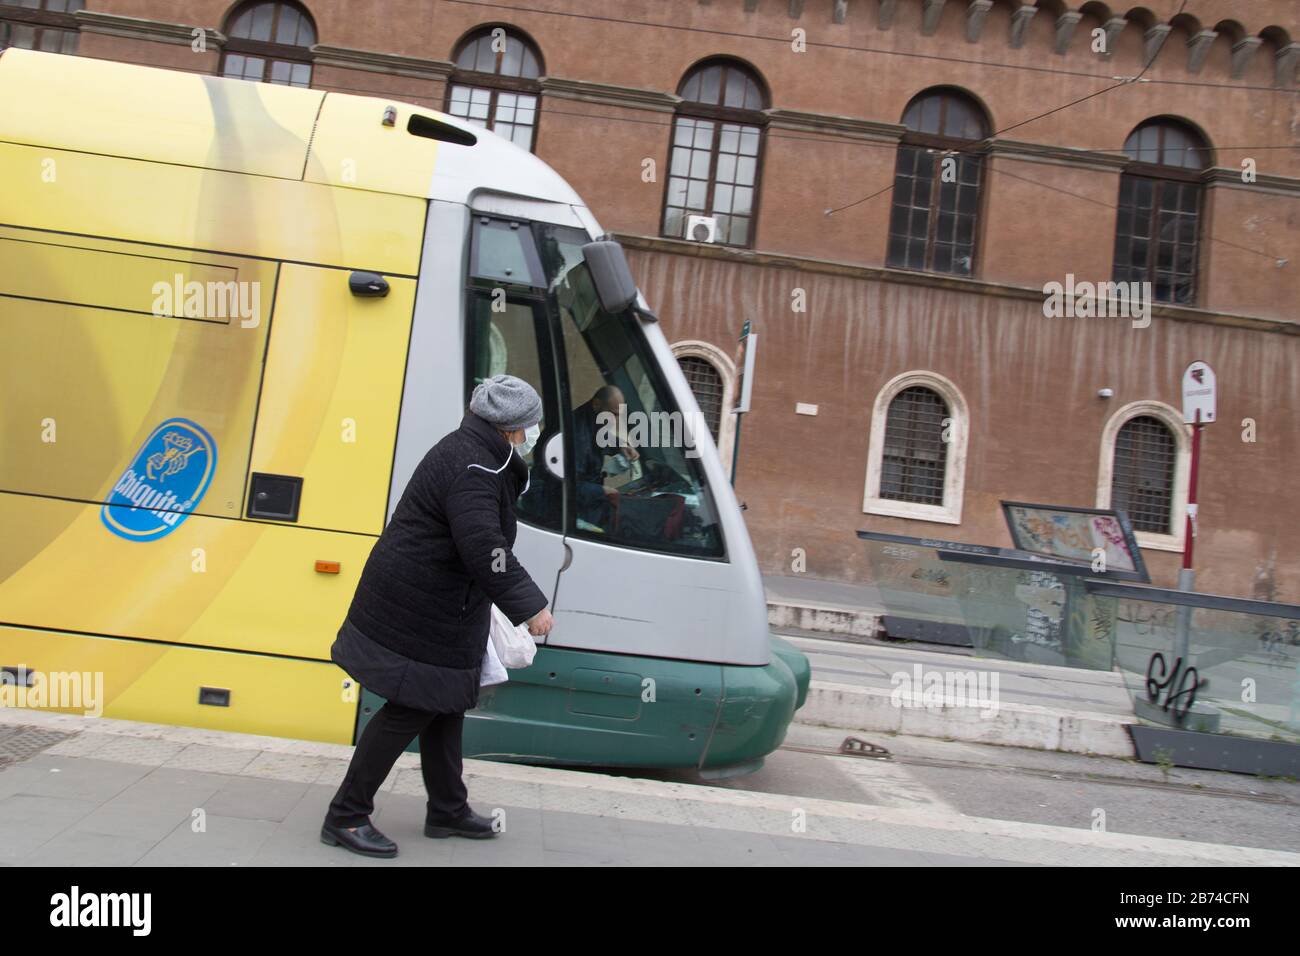 Roma, Italy. 13th Mar, 2020. Woman with antivirus mask at tram stop near Piazza Venezia in Rome after the Decree of the Italian Government 11 March 2020 (Photo by Matteo Nardone/Pacific Press) Credit: Pacific Press Agency/Alamy Live News Stock Photo